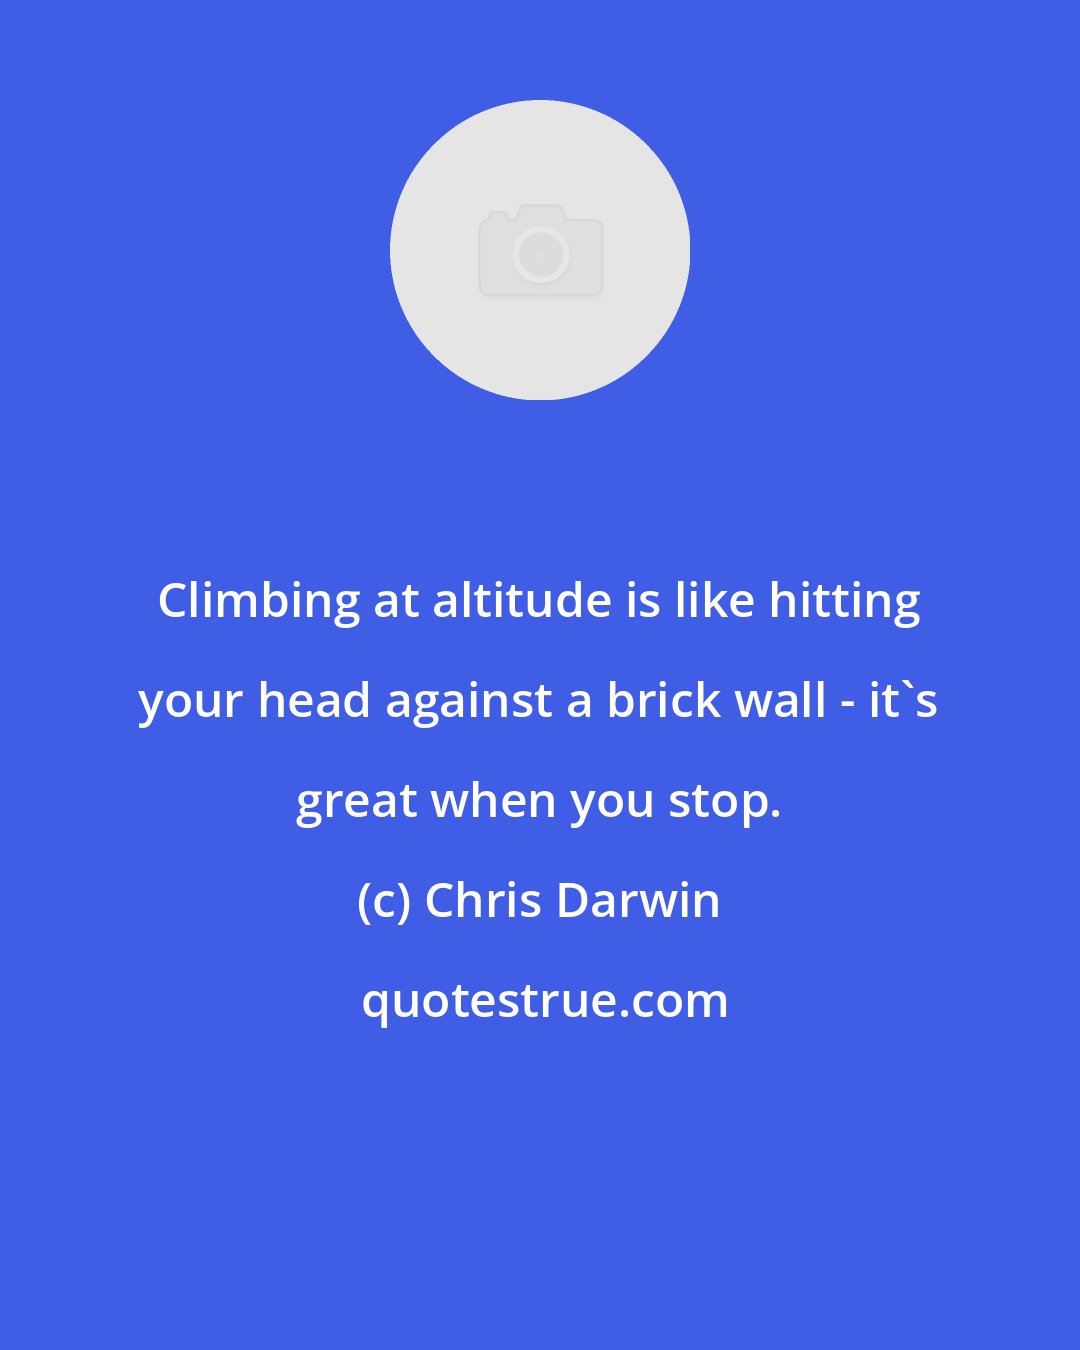 Chris Darwin: Climbing at altitude is like hitting your head against a brick wall - it's great when you stop.